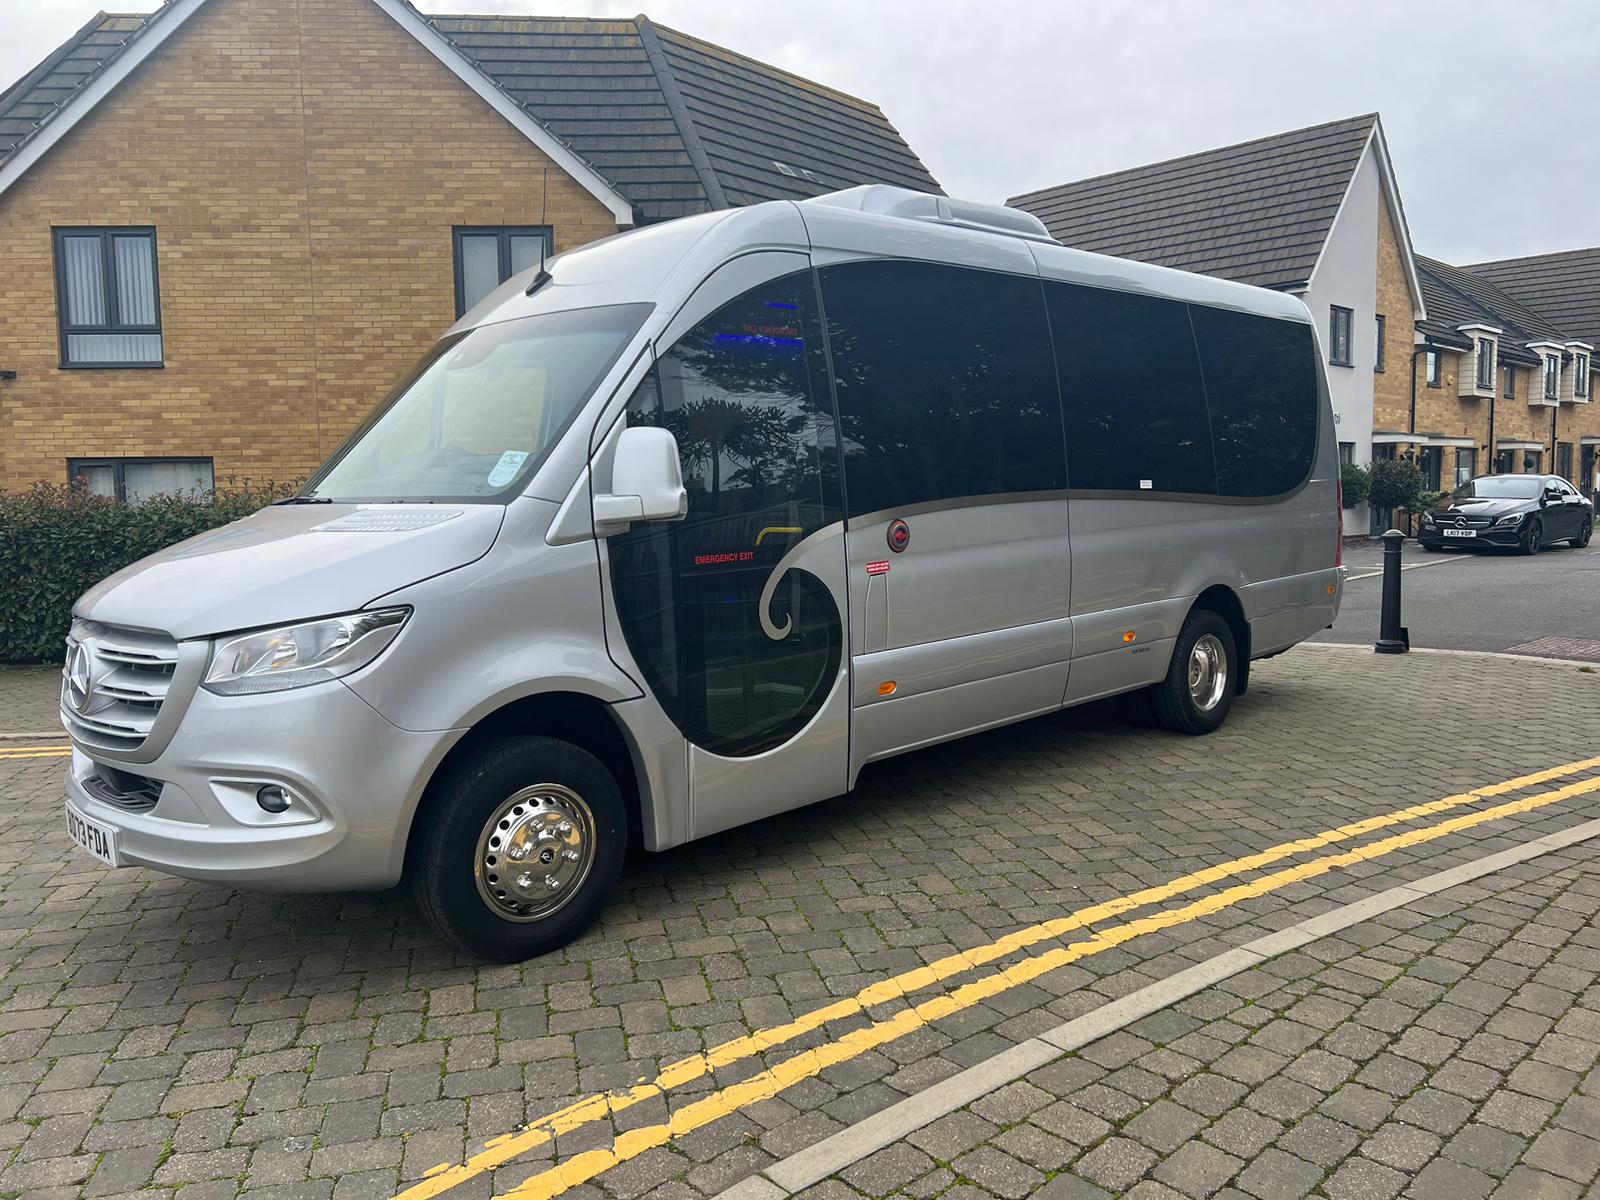 The Ultimate Guide to Minibus Hire in the UK